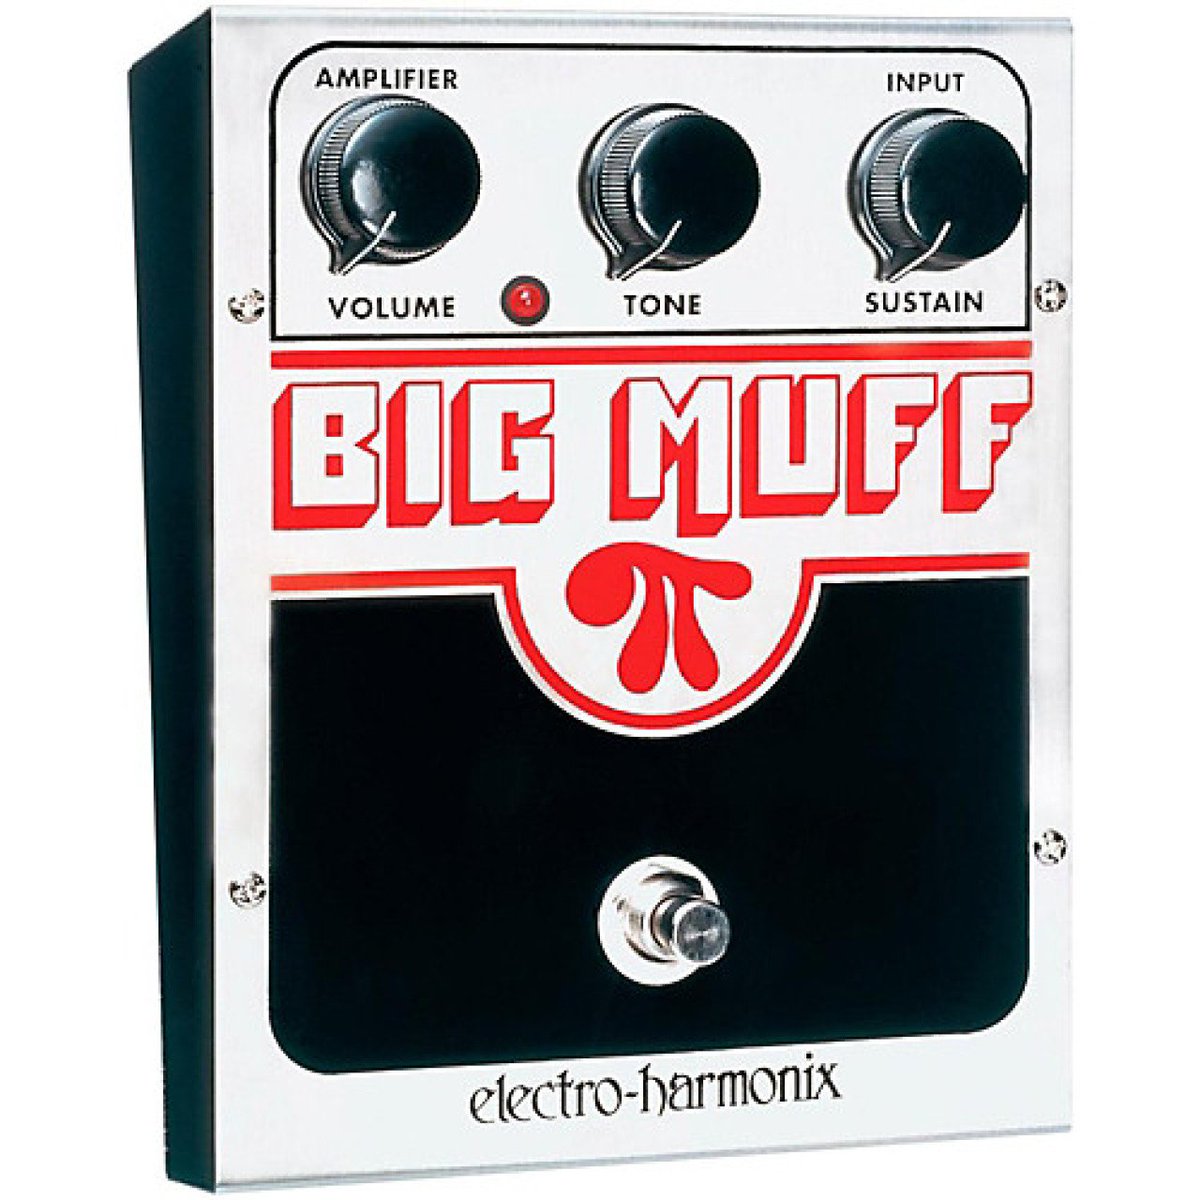 Purchase the @ehx Big Muff Pi Distortion/Sustainer today! l.rigshare.com/aHR0cHM6Ly9yZX… #rigshare #audioeffects #effects